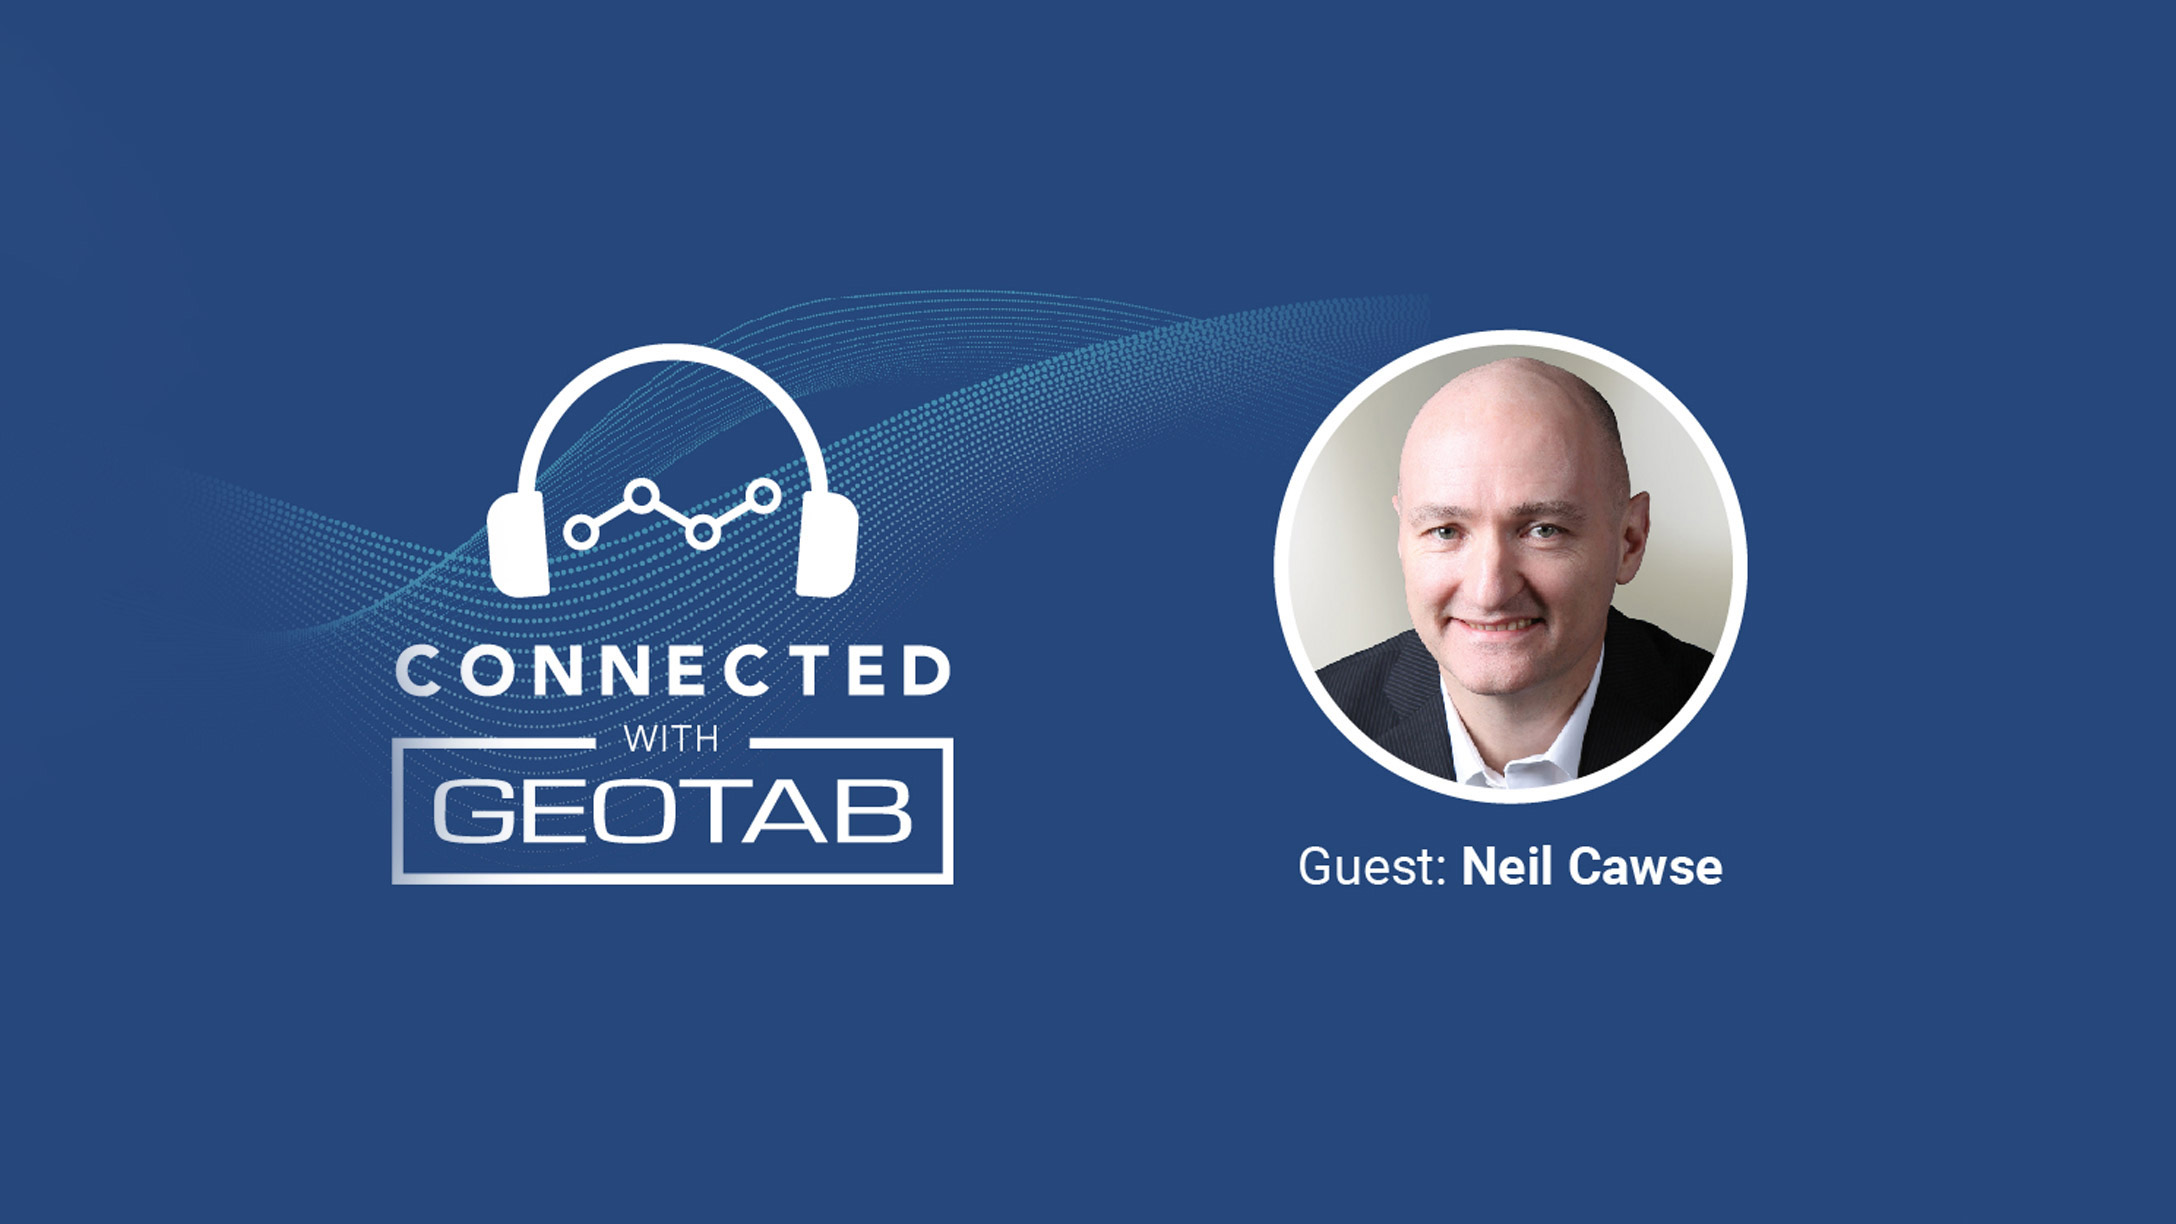 Connected with Geotab podcast with guest: CEO Neil Cawse